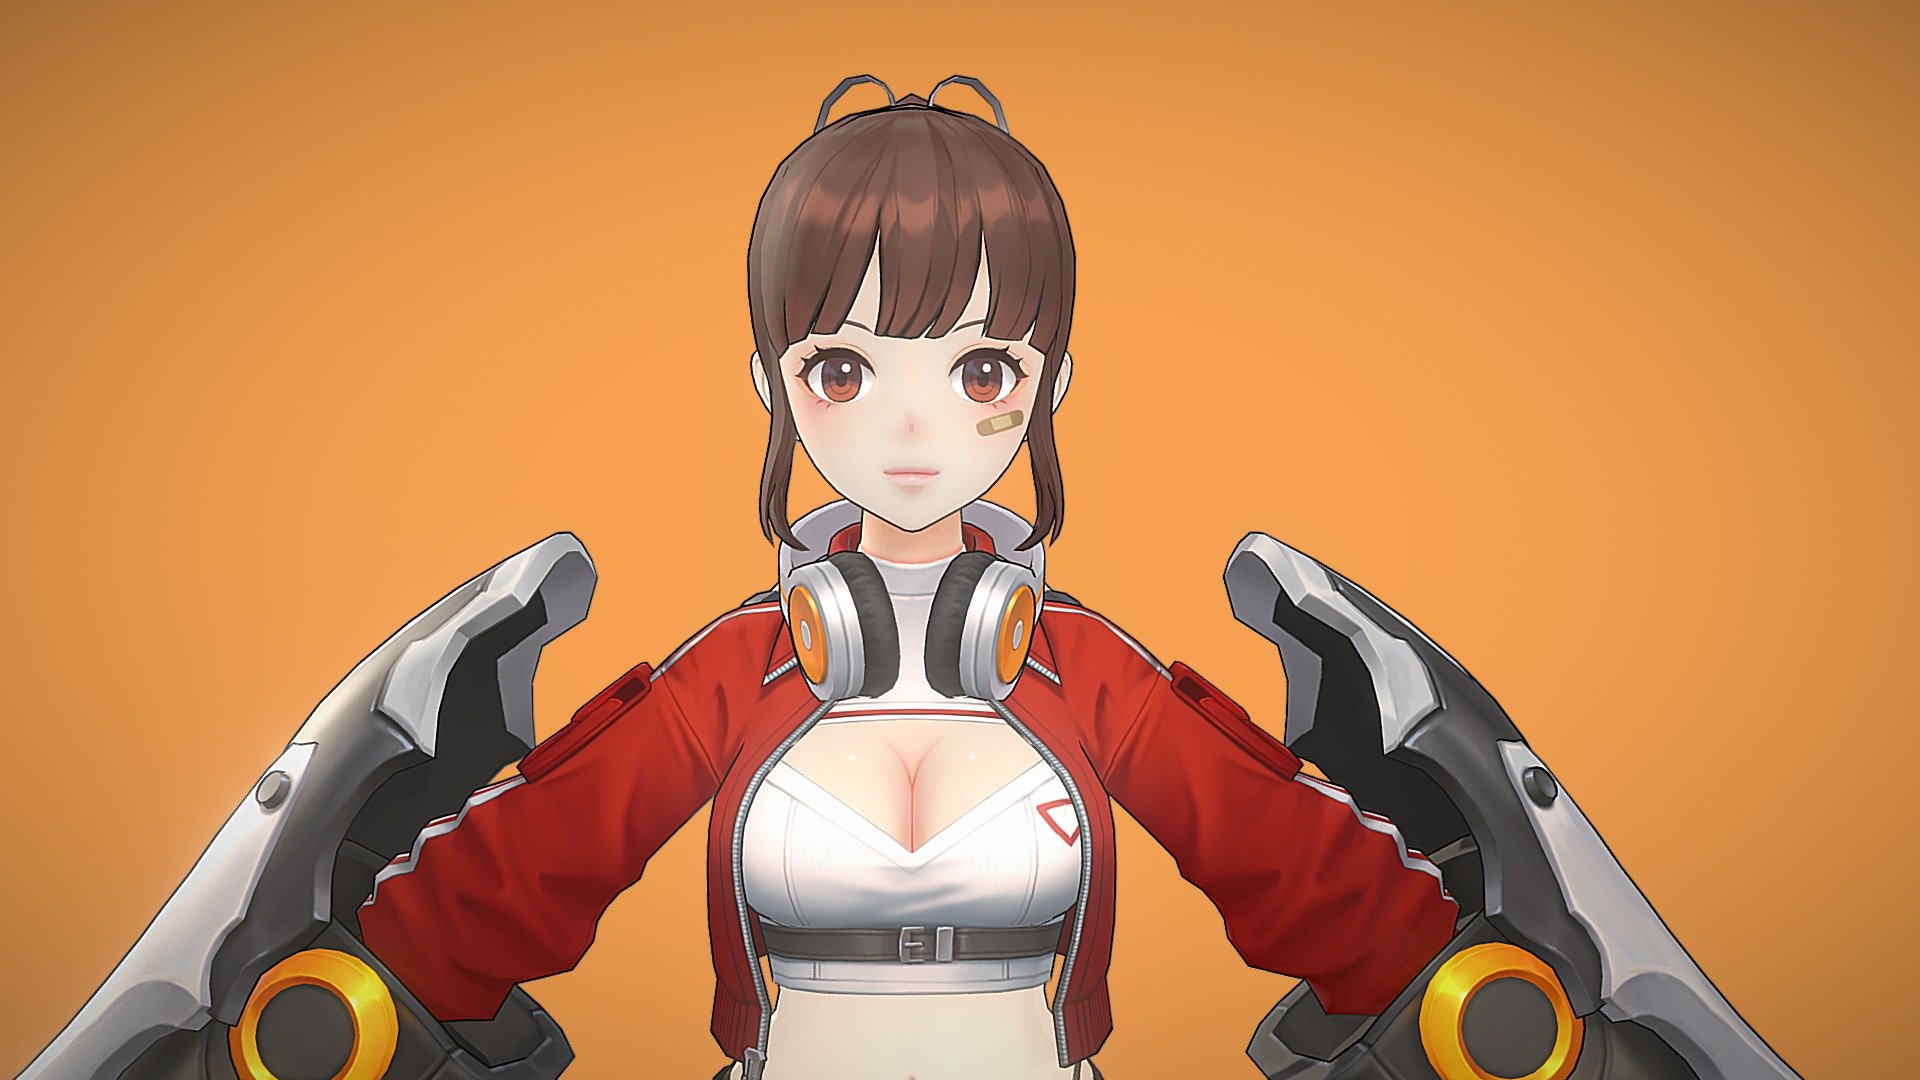 Hello

In my project, I designed a character with a school concept and performed 3D modeling.
This character is based on a track and field club concept. I have uploaded it to Sketchfab so it can be viewed in a 3D viewer.
You may refer to the modeling, but commercial use is not permitted. 
Thank you.

안녕하세요

저는 프로젝트에서 스쿨컨셉에 캐릭터를 기획하고 3d모델링 했습니다.
이 캐릭터는 육상부 컨셉에 캐릭터 입니다. 3D 뷰어로 볼 수 있도록 스케치팹에 업로드했습니다.
모델링을 참고하실 수는 있지만, 상업적 사용은 허용되지 않습니다.
감사합니다.

ⓒ 2022. (NovaCore) all rights reserved 3d model